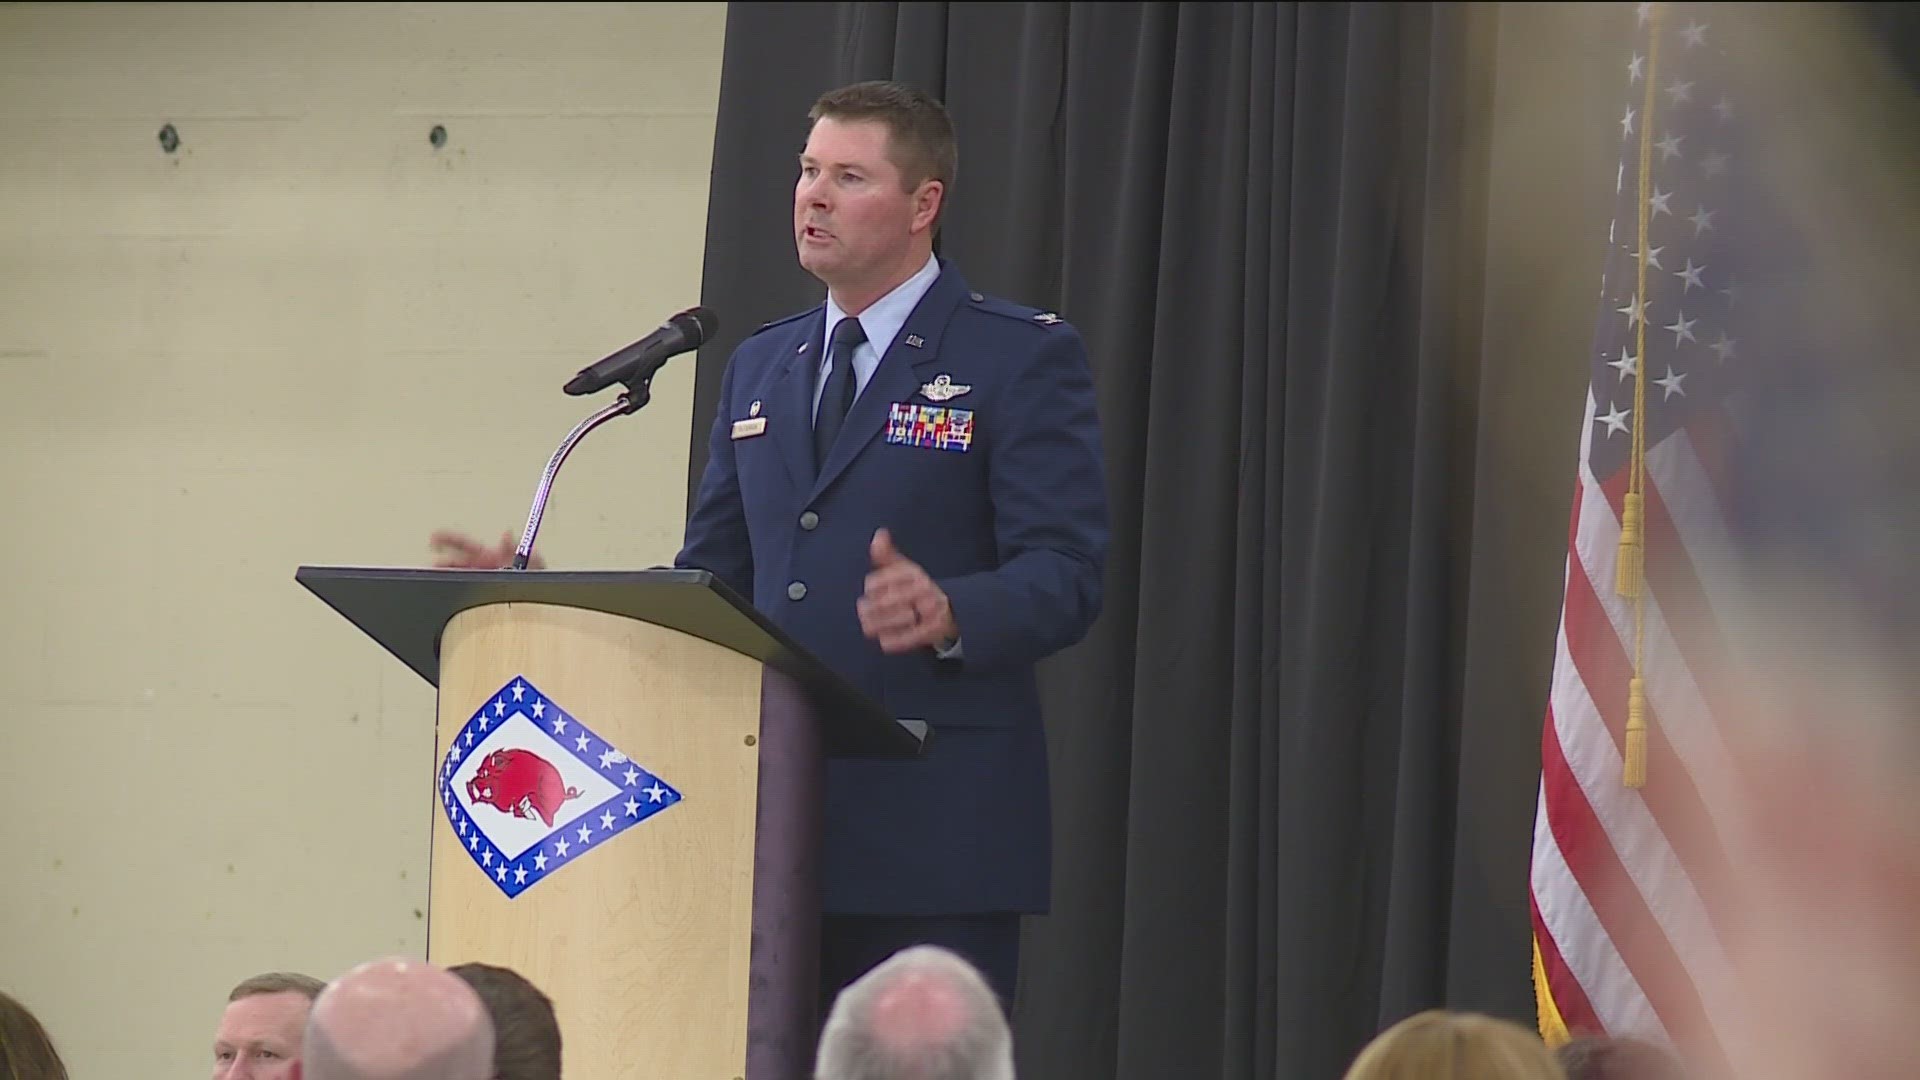 Gov. Sanders said Colonel Dillon Patterson was forced to choose between continuing his command or adhering to his religious beliefs against abortion.